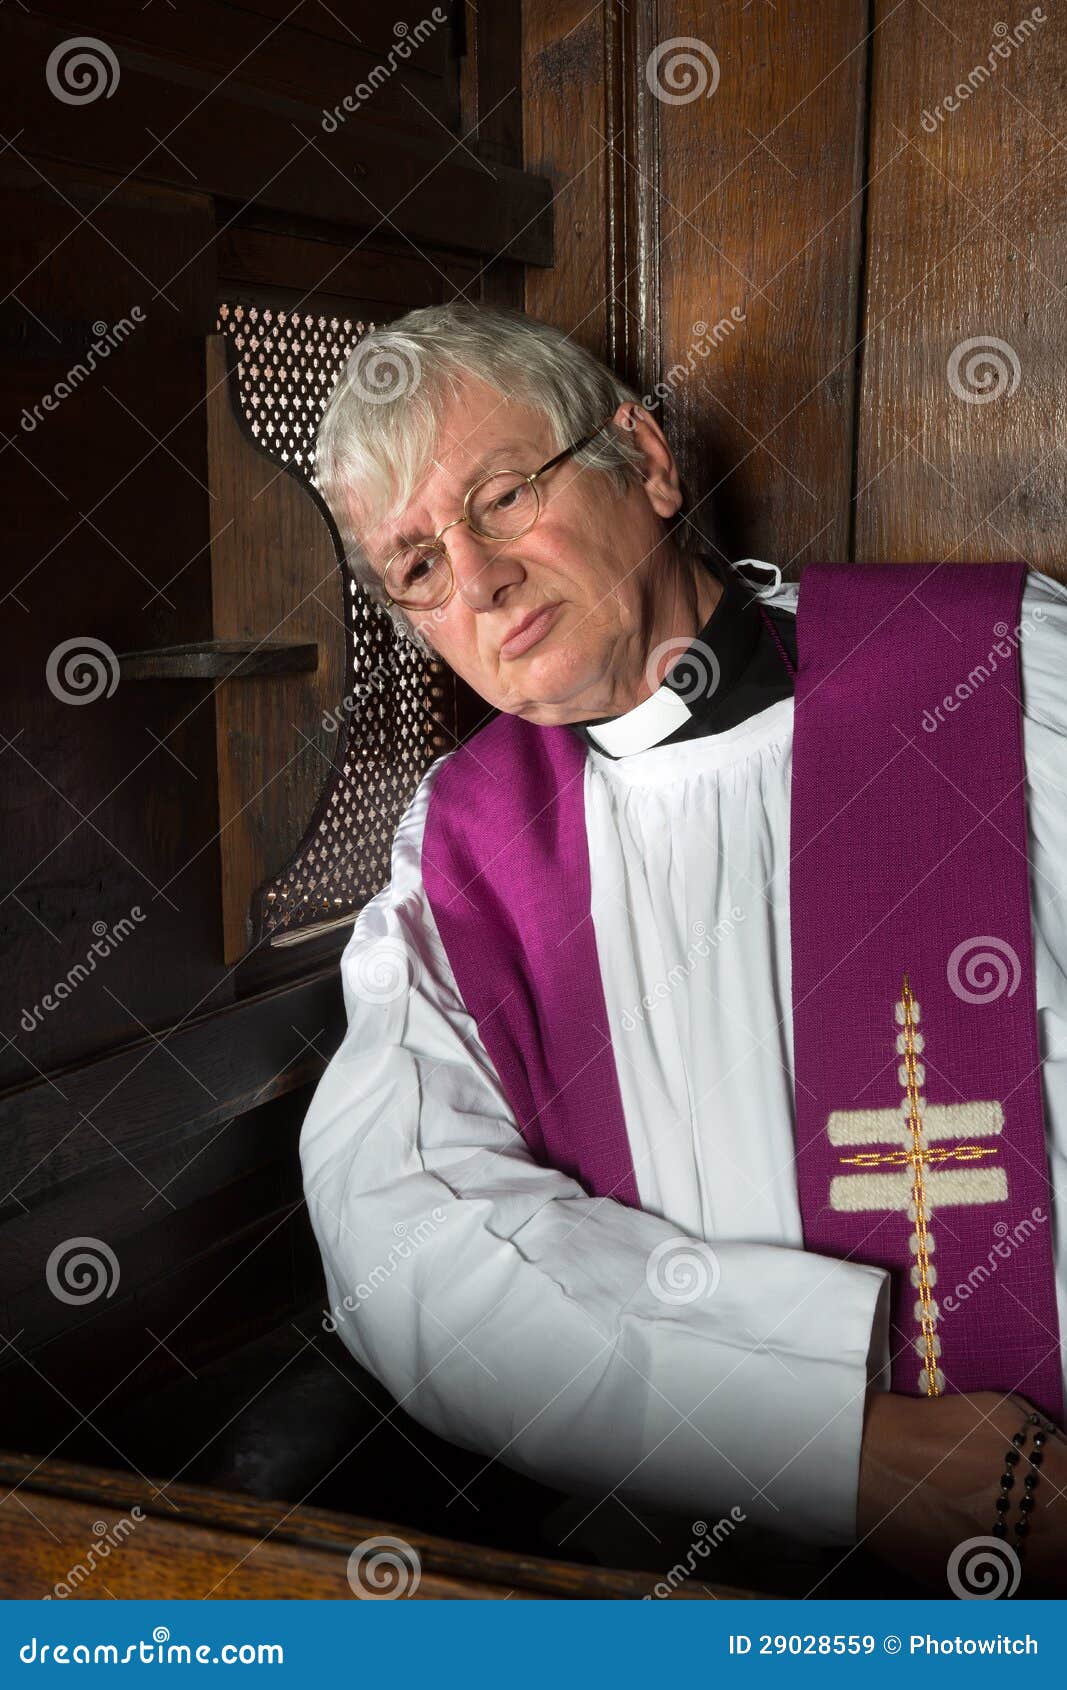 vicar in confession booth